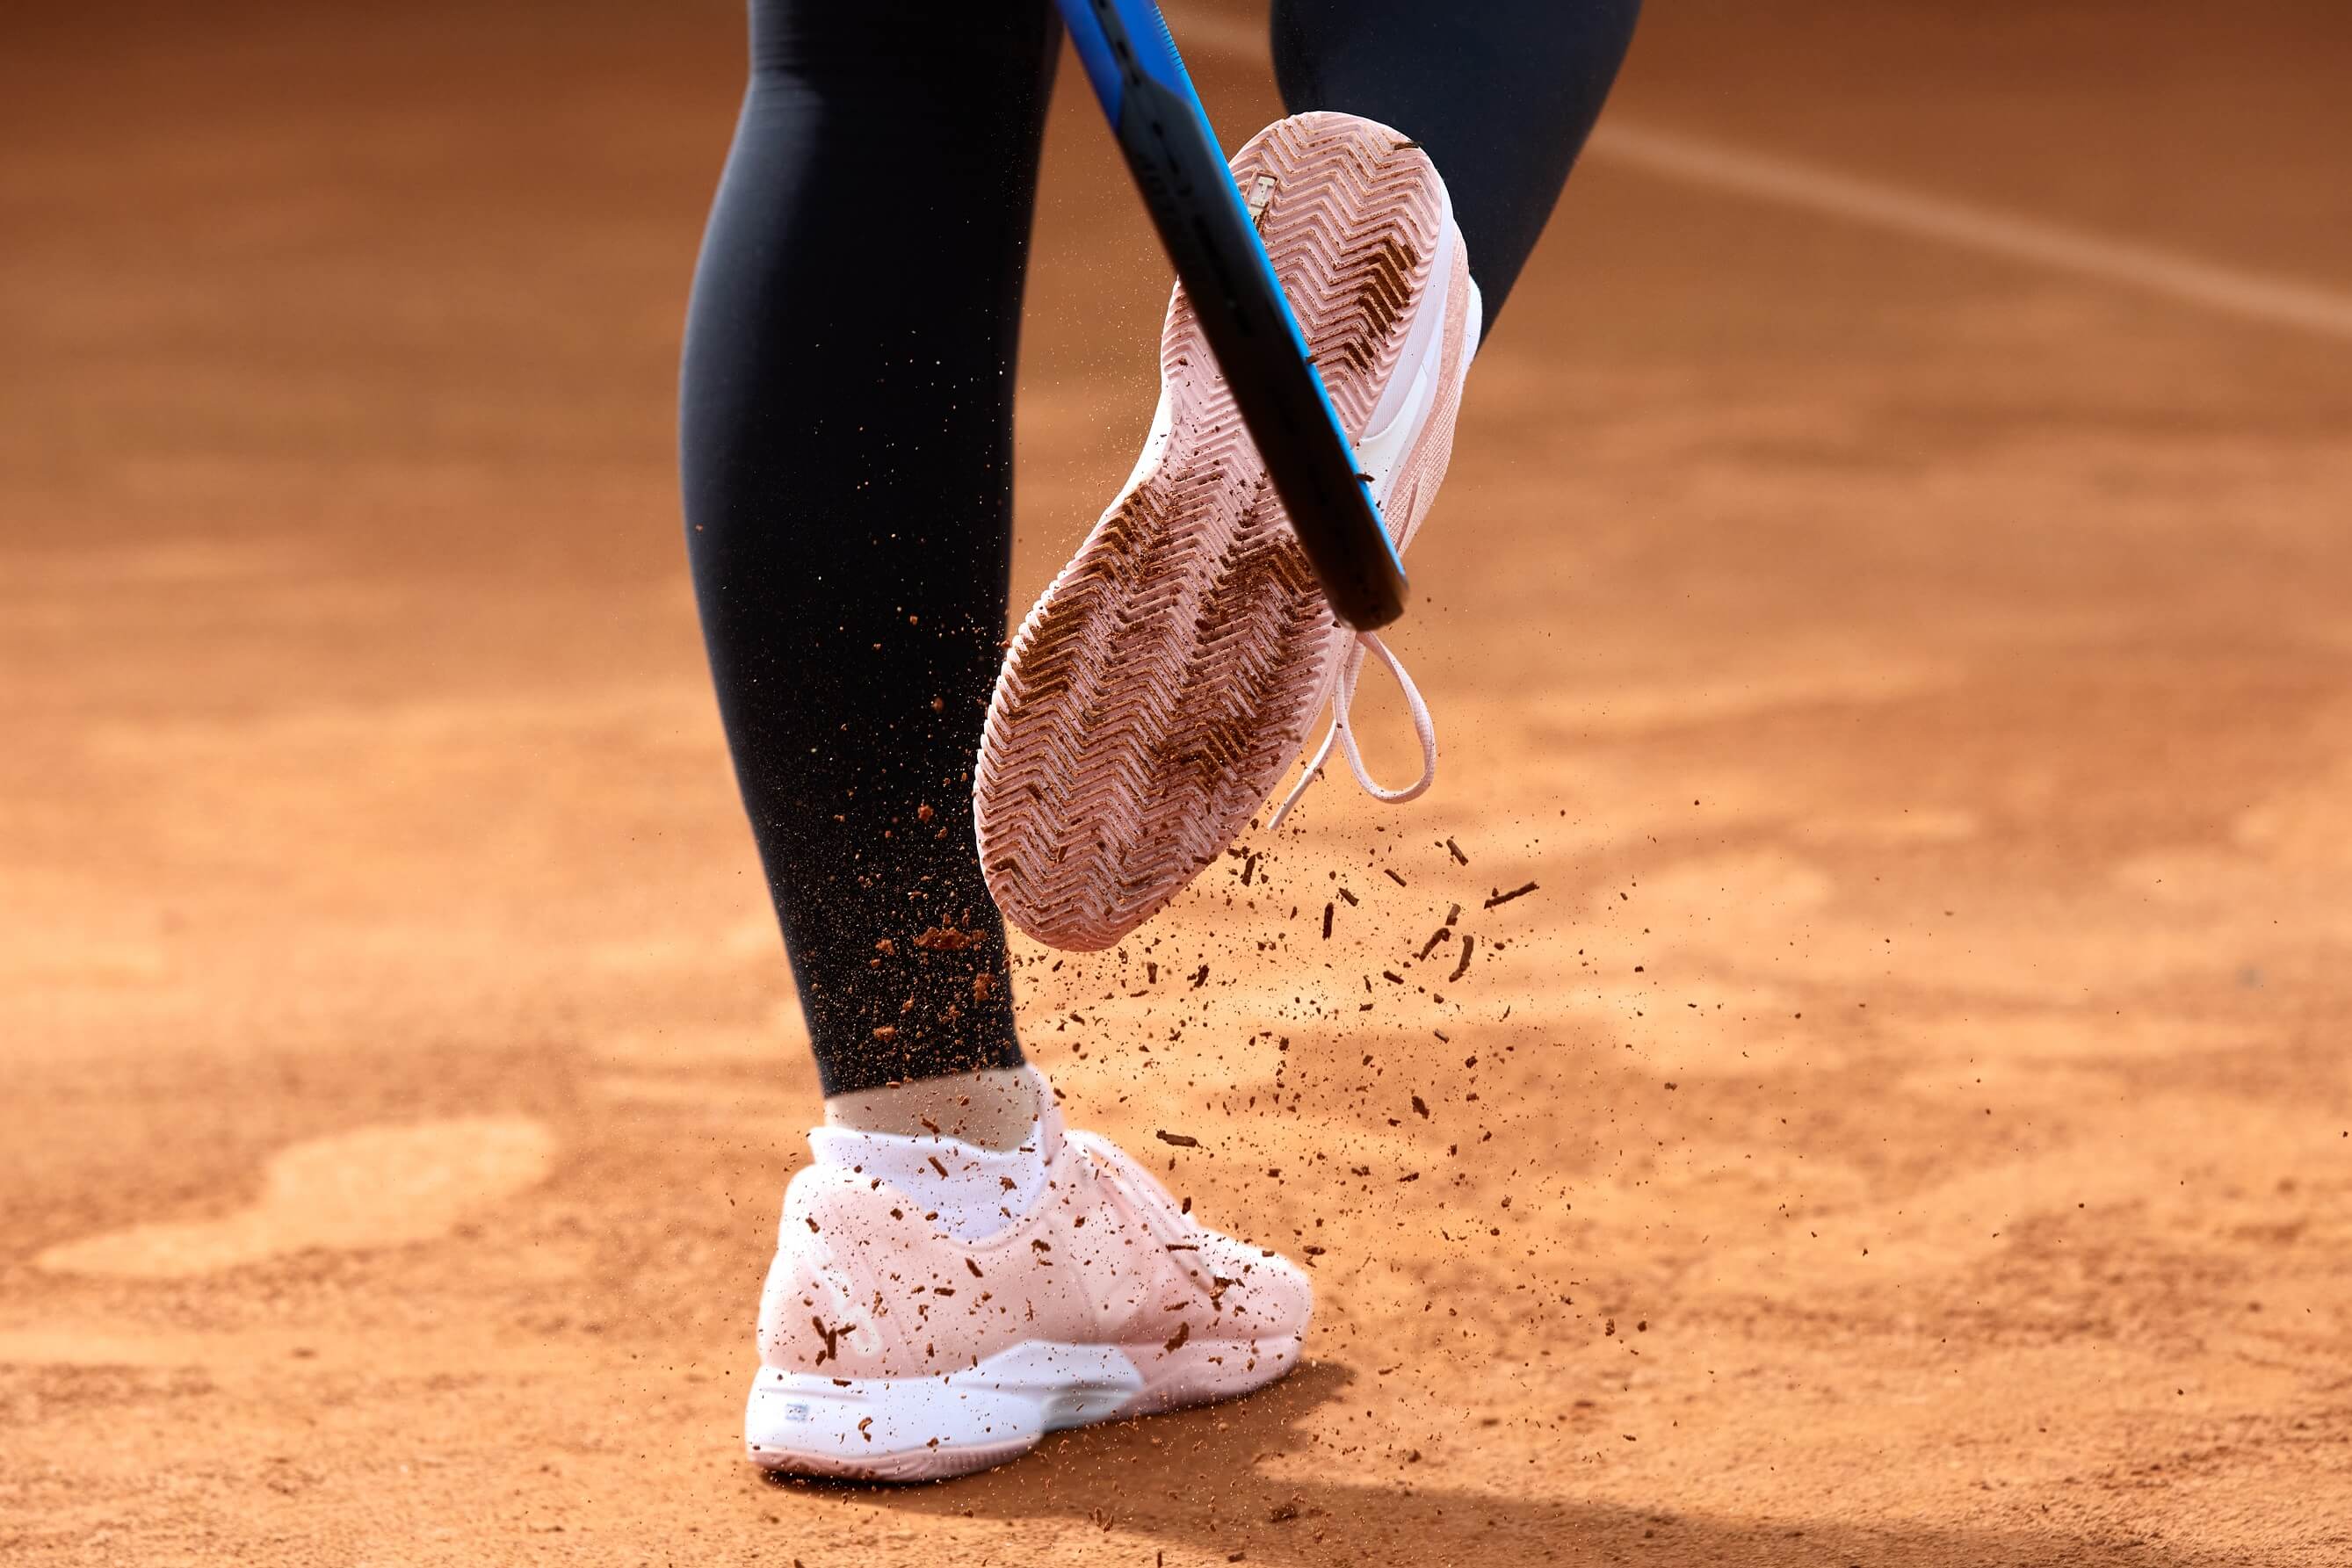 Close-up of tennis player's feet kicking the racket